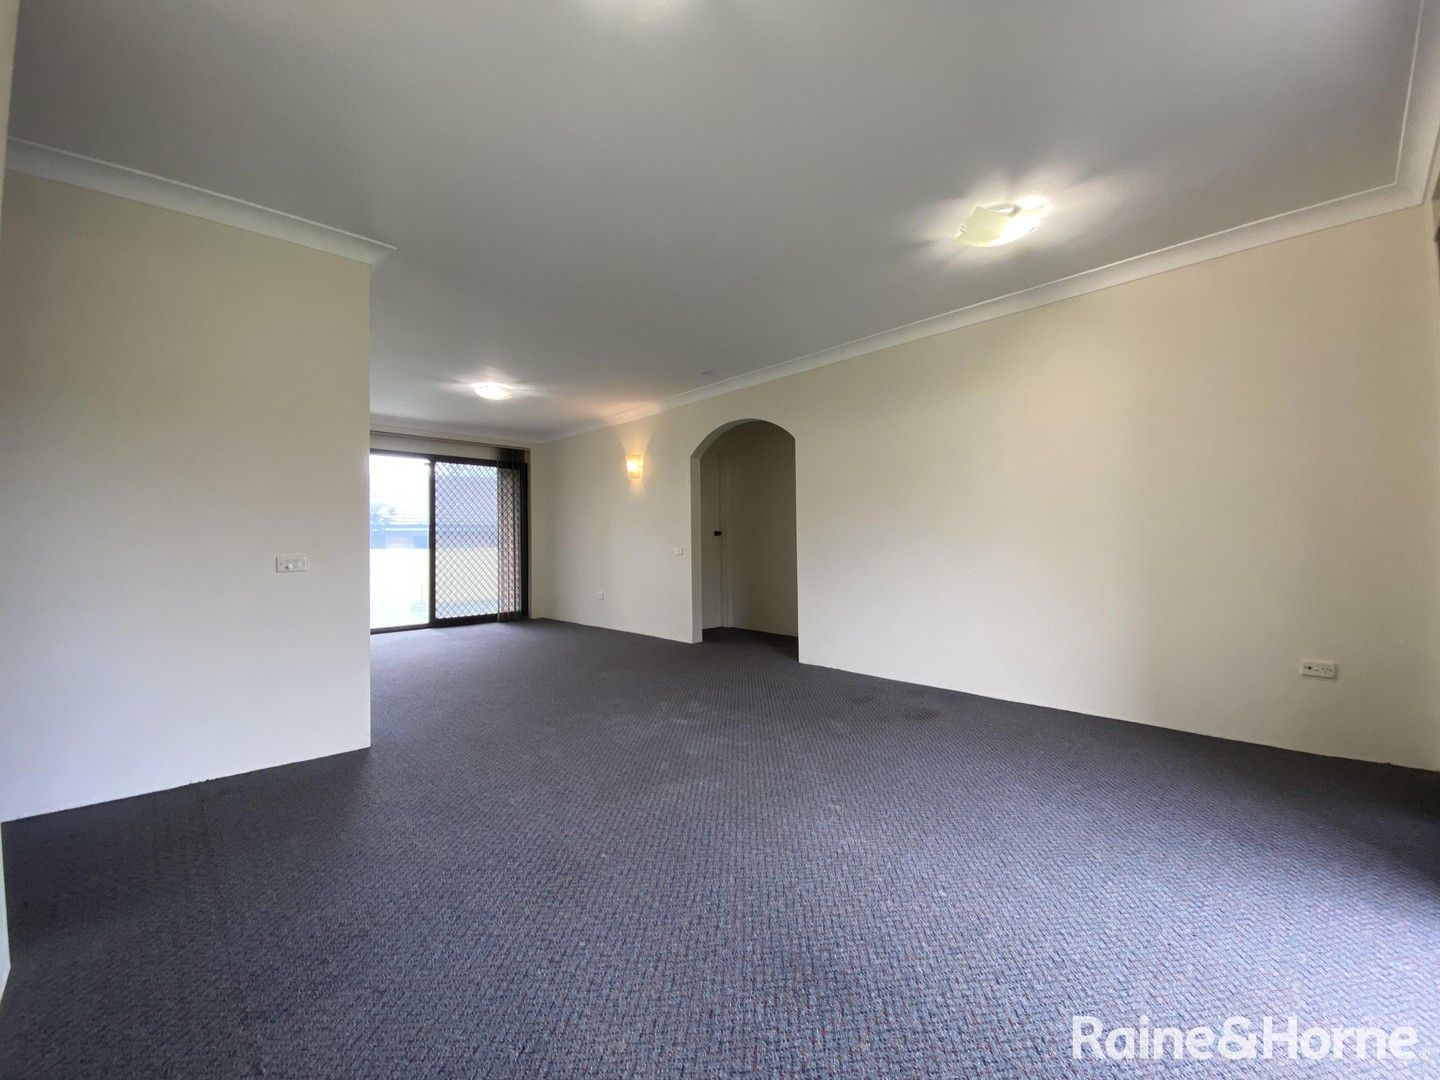 2 bedrooms Apartment / Unit / Flat in 3/30 Skellatar Street MUSWELLBROOK NSW, 2333